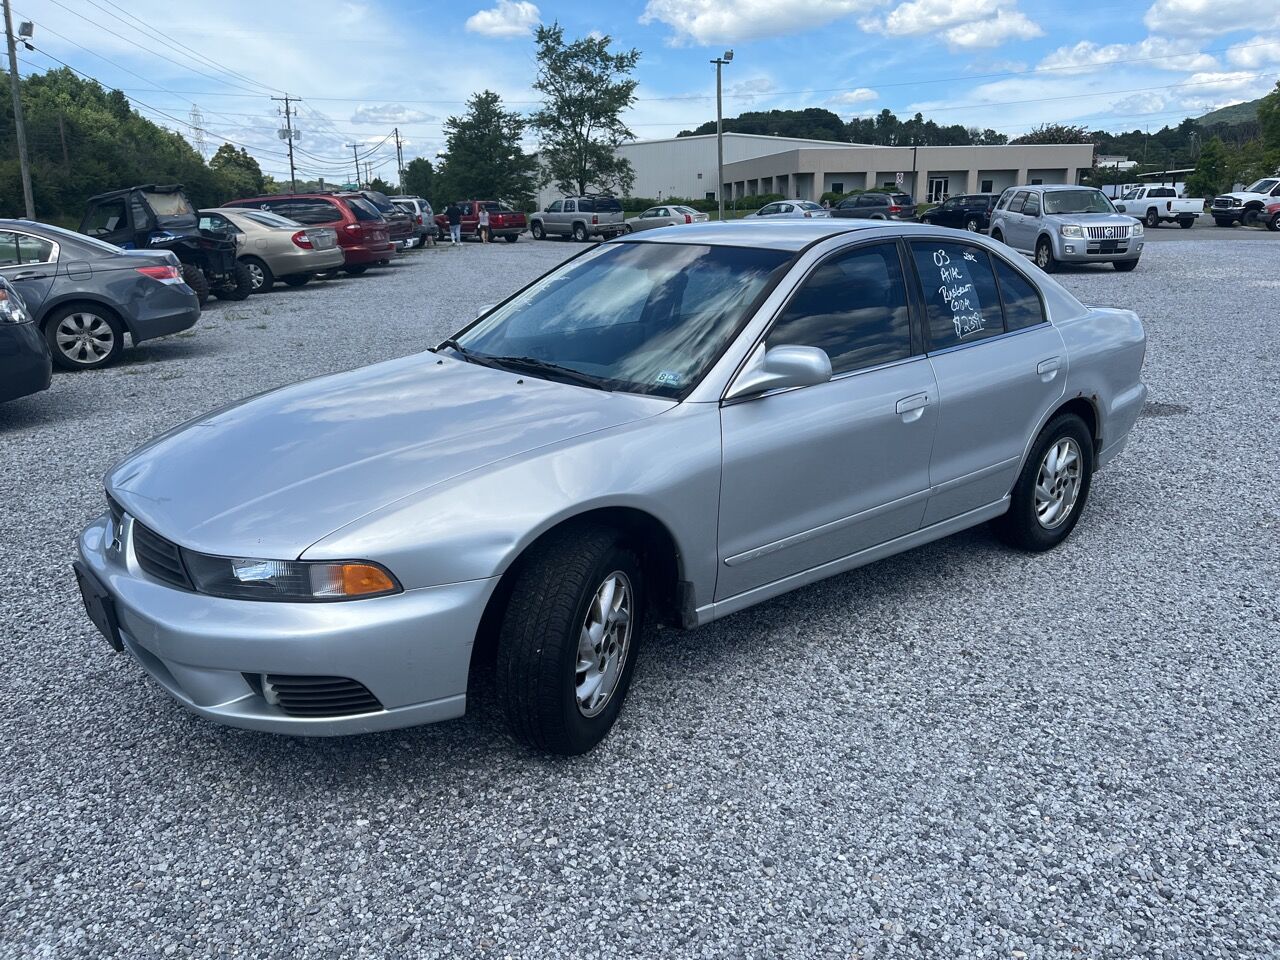 2003 Mitsubishi Galant For Sale In Lewisville, TX - Carsforsale.com®